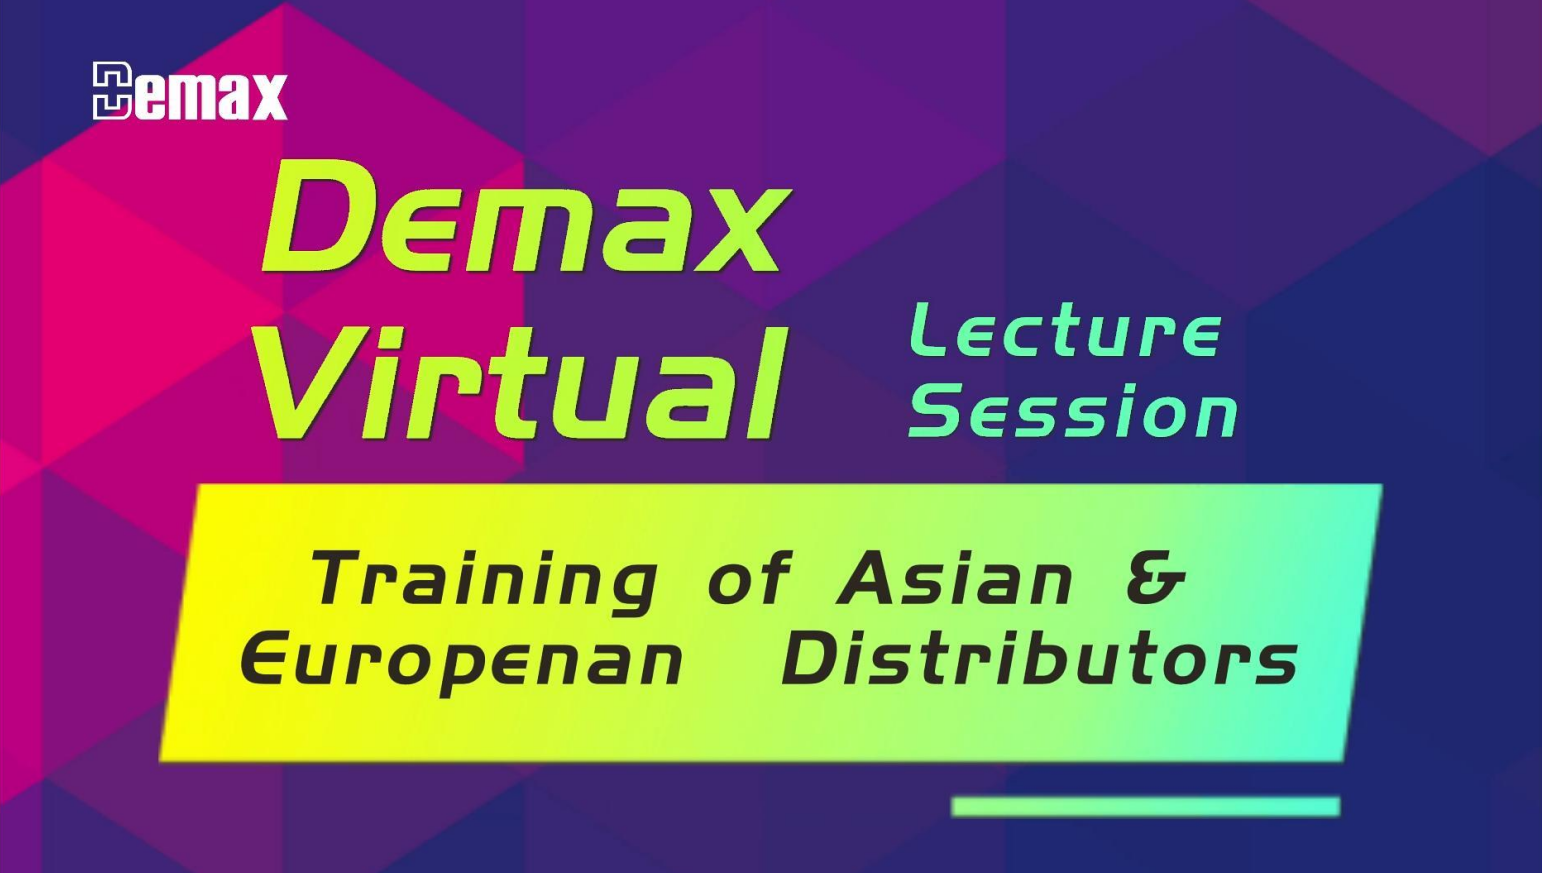 Demax Virtual Lecture Session — Training of Asian & European Distributors Achieved Success